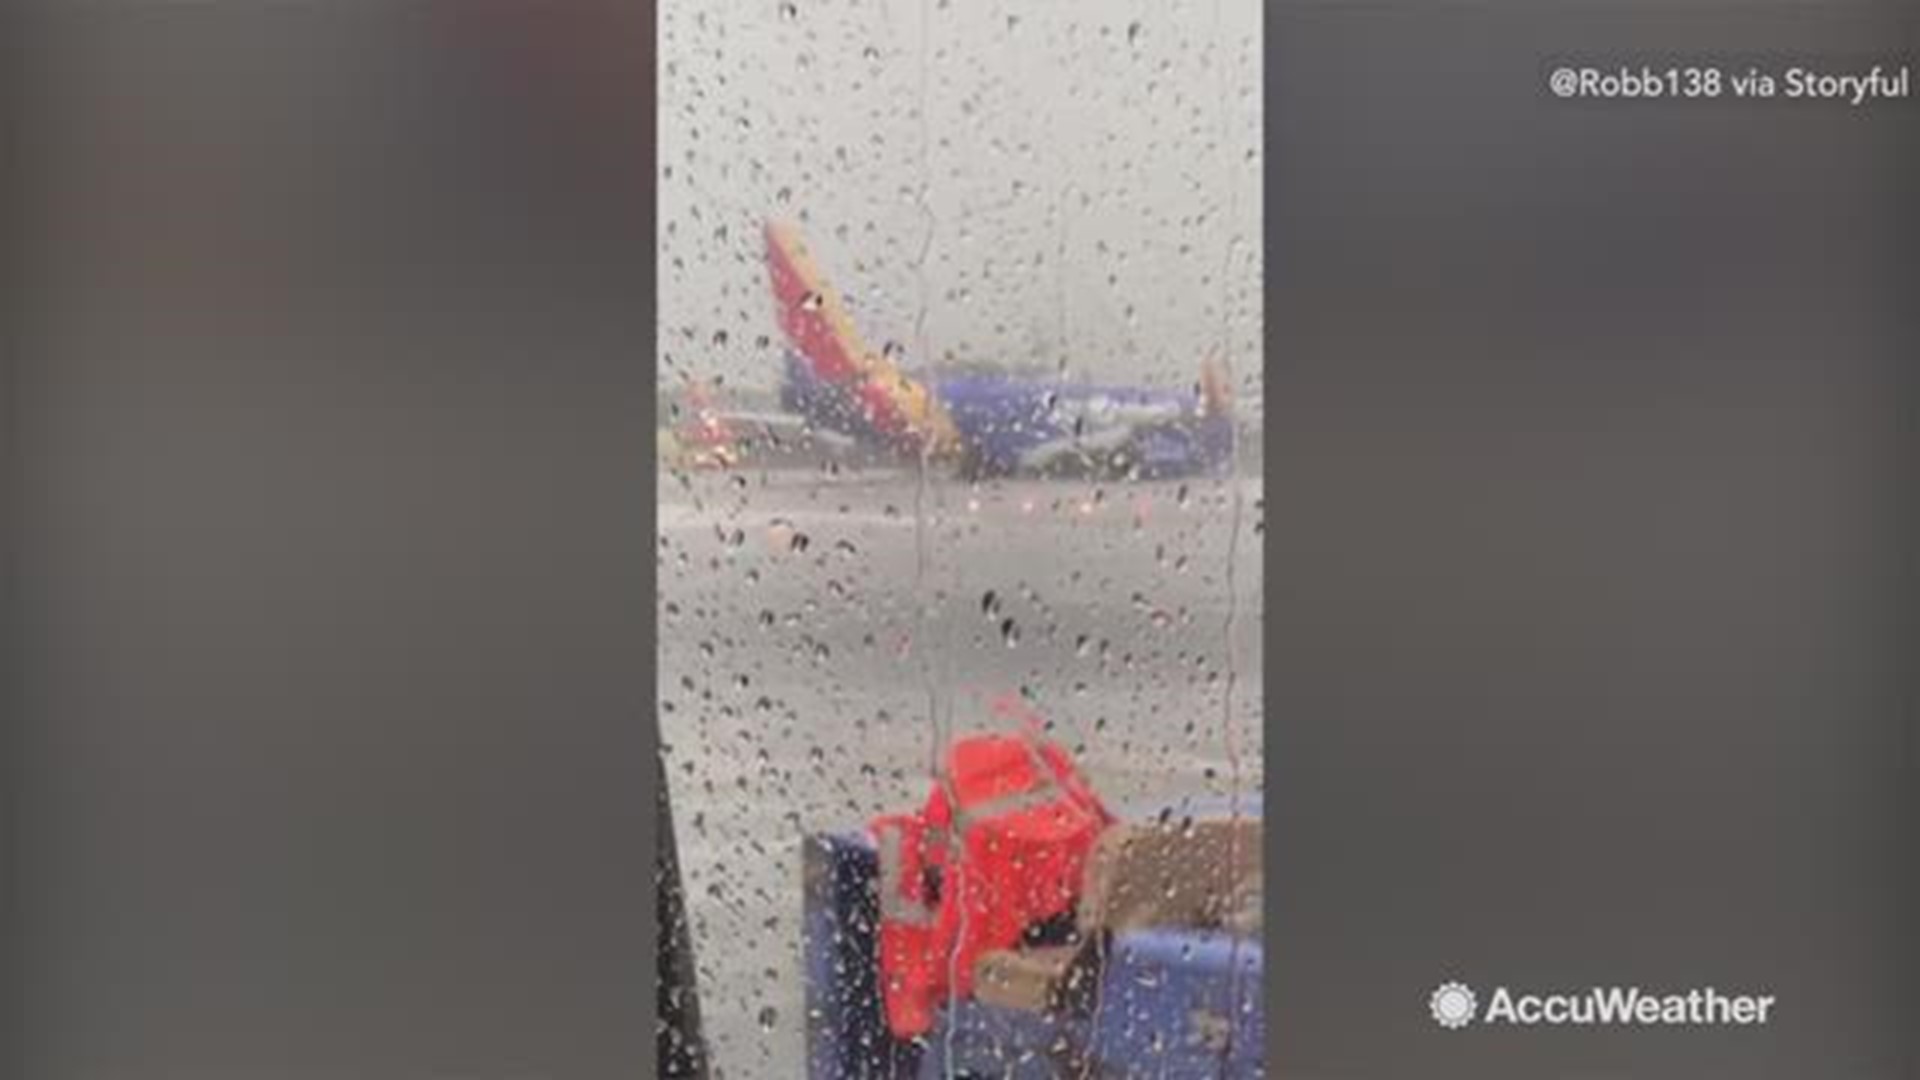 A Southwest Airlines flight slid off the end of the wet runway while landing at Hollywood Burbank Airport in Burbank, California. No injuries have been reported so far.